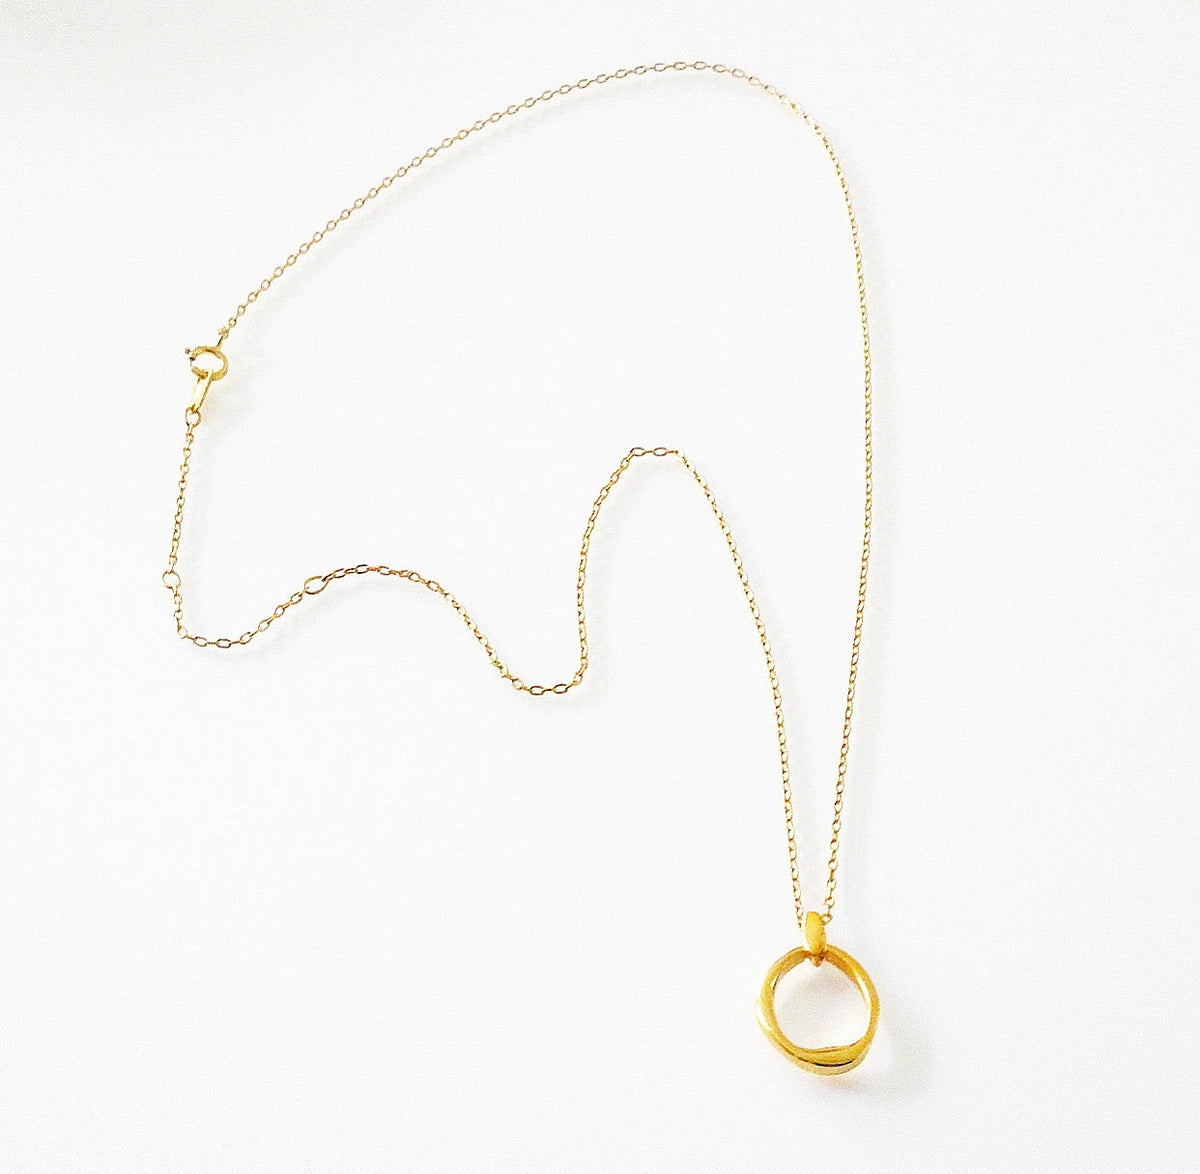 Gold necklace, sterling silver 925 necklaces, gold plated necklaces, silver necklaces, circle necklaces, sterling silver circle necklace, tiffanys jewelry, tiffanys style necklaces, tarnish free necklaces, new jewelry styles, fashion jewelry, dainy necklaces, minimalist necklaces, necklaces that dont turn green with water, dainty jewelry, trending on tiktok, gifts, birthday gifts, anniversary gifts, kesley jewelry, silver necklaces, cheap necklaces, fine jewelry, designer jewelry